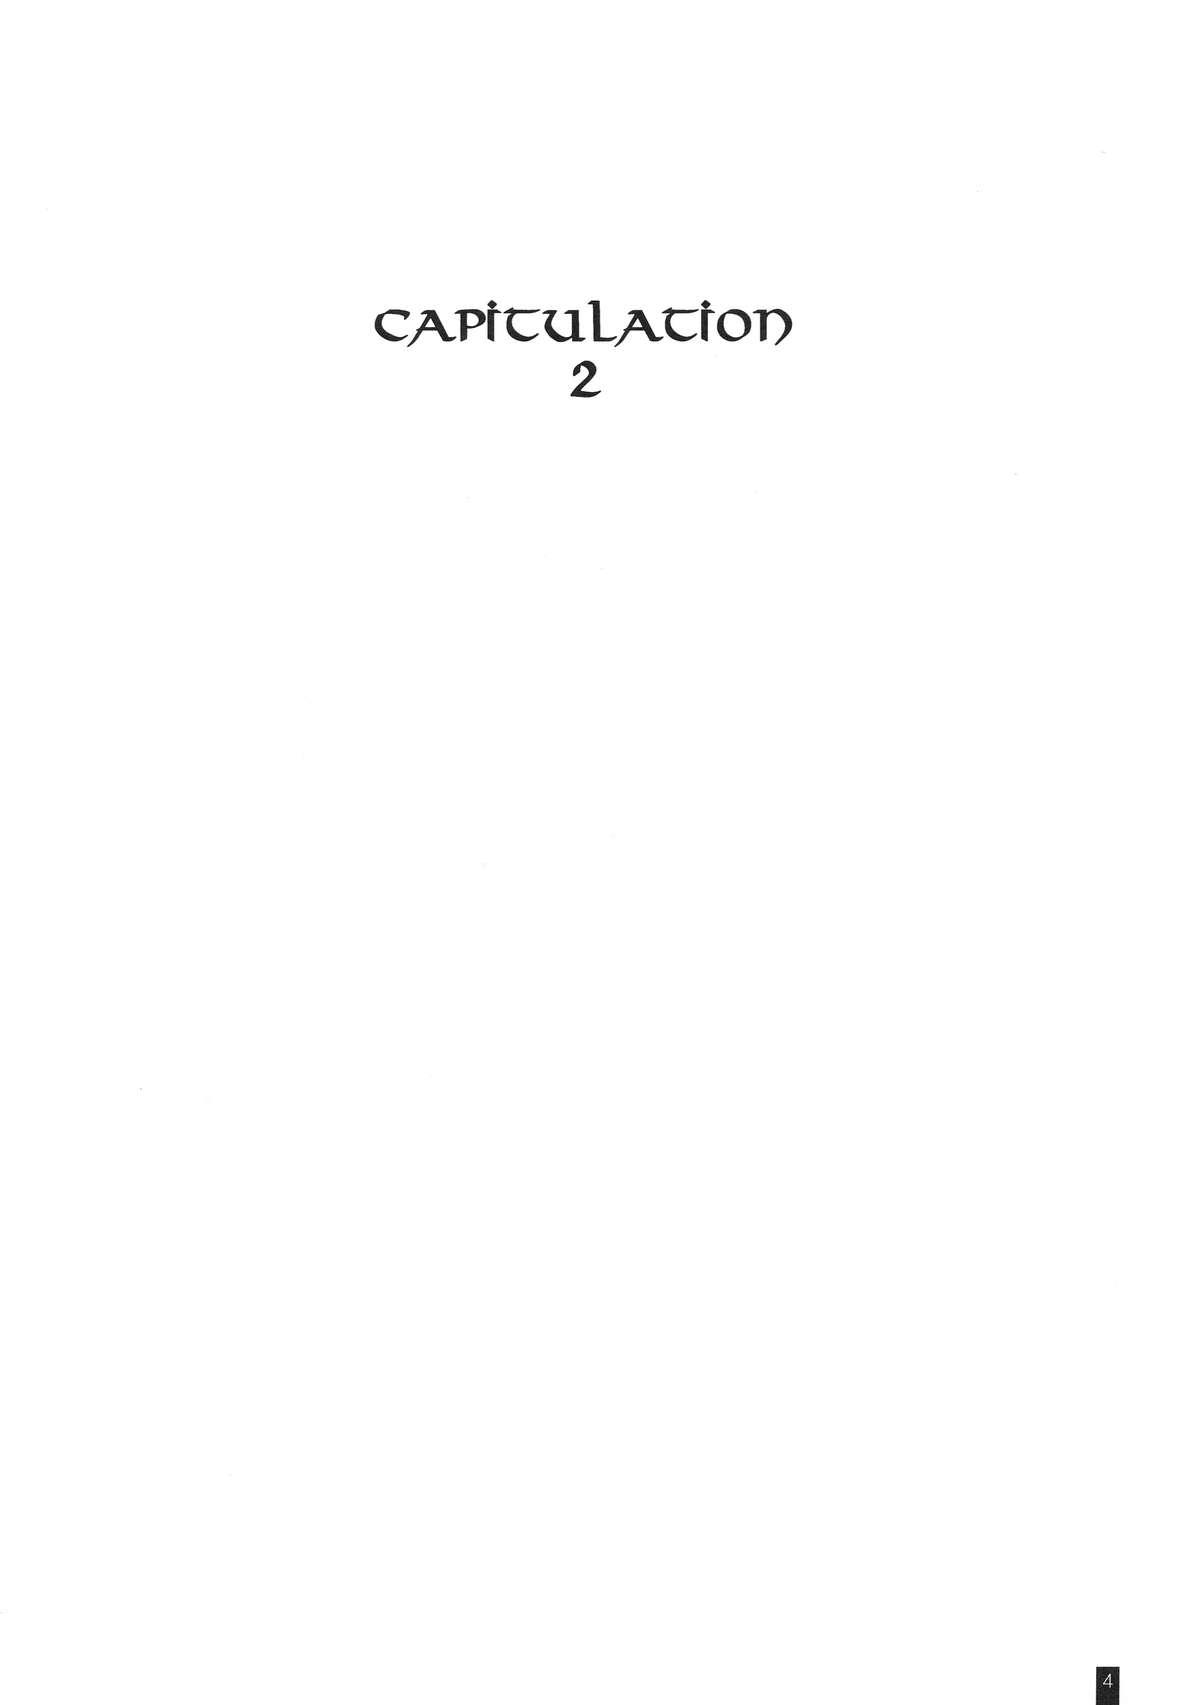 CAPITULATION 2 2